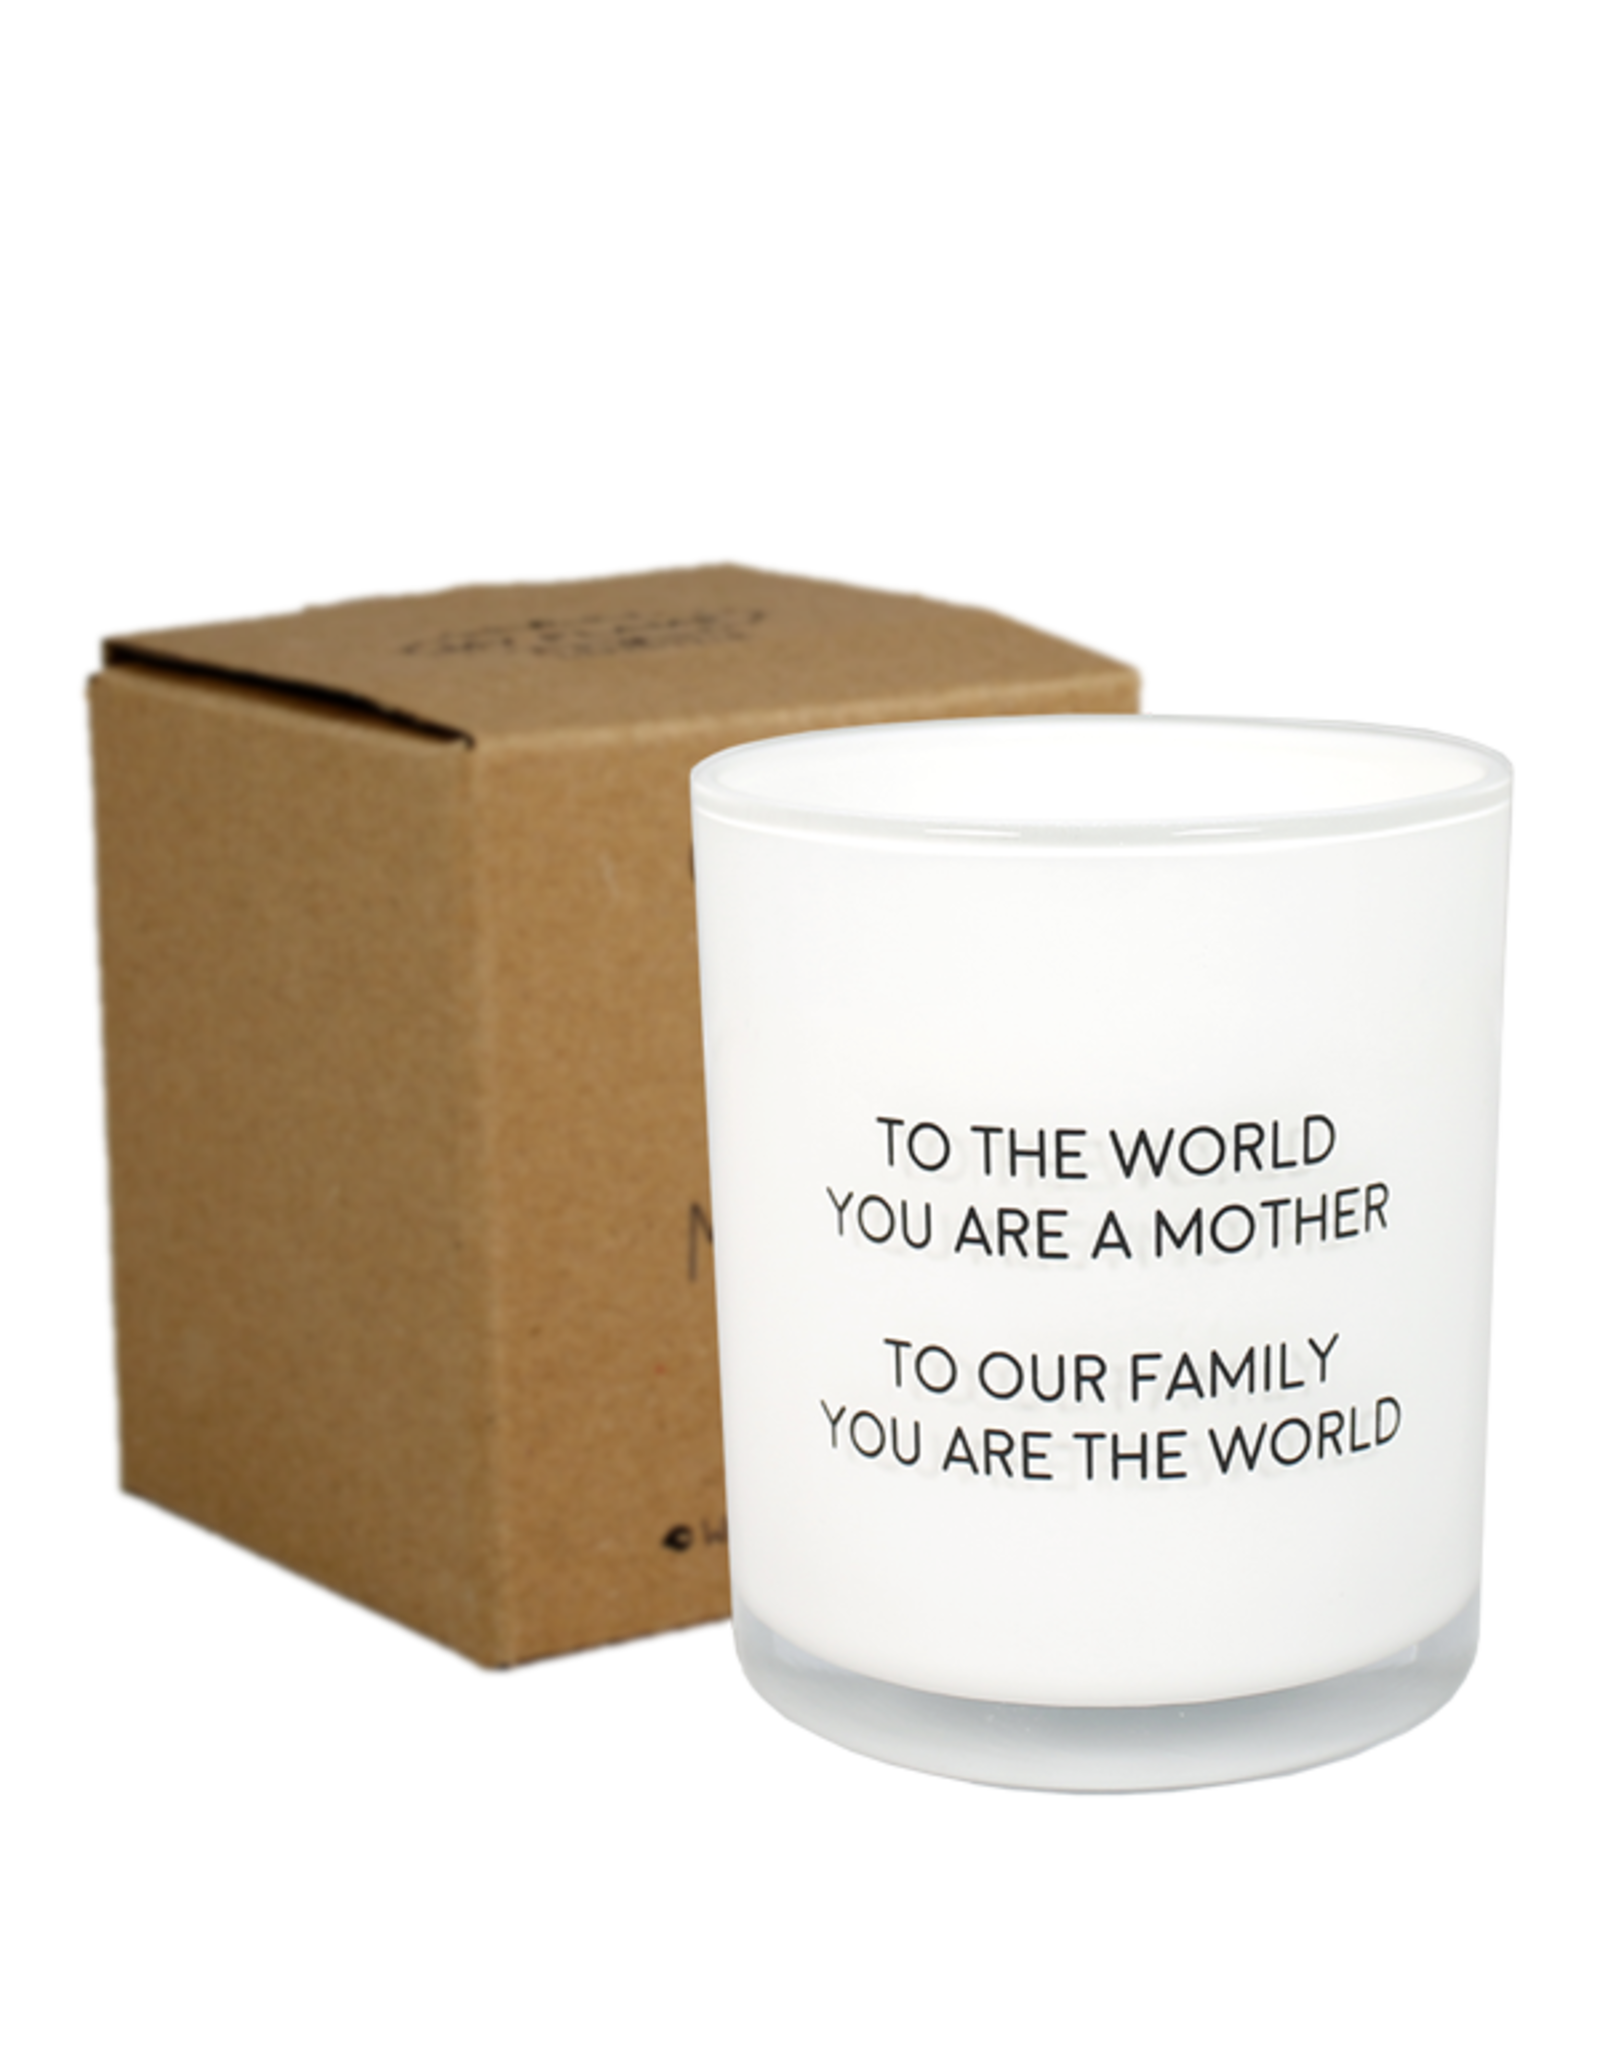 My flame Lifestyle  Sojakaars met houten lont  | You are the world | Fresh  Cotton